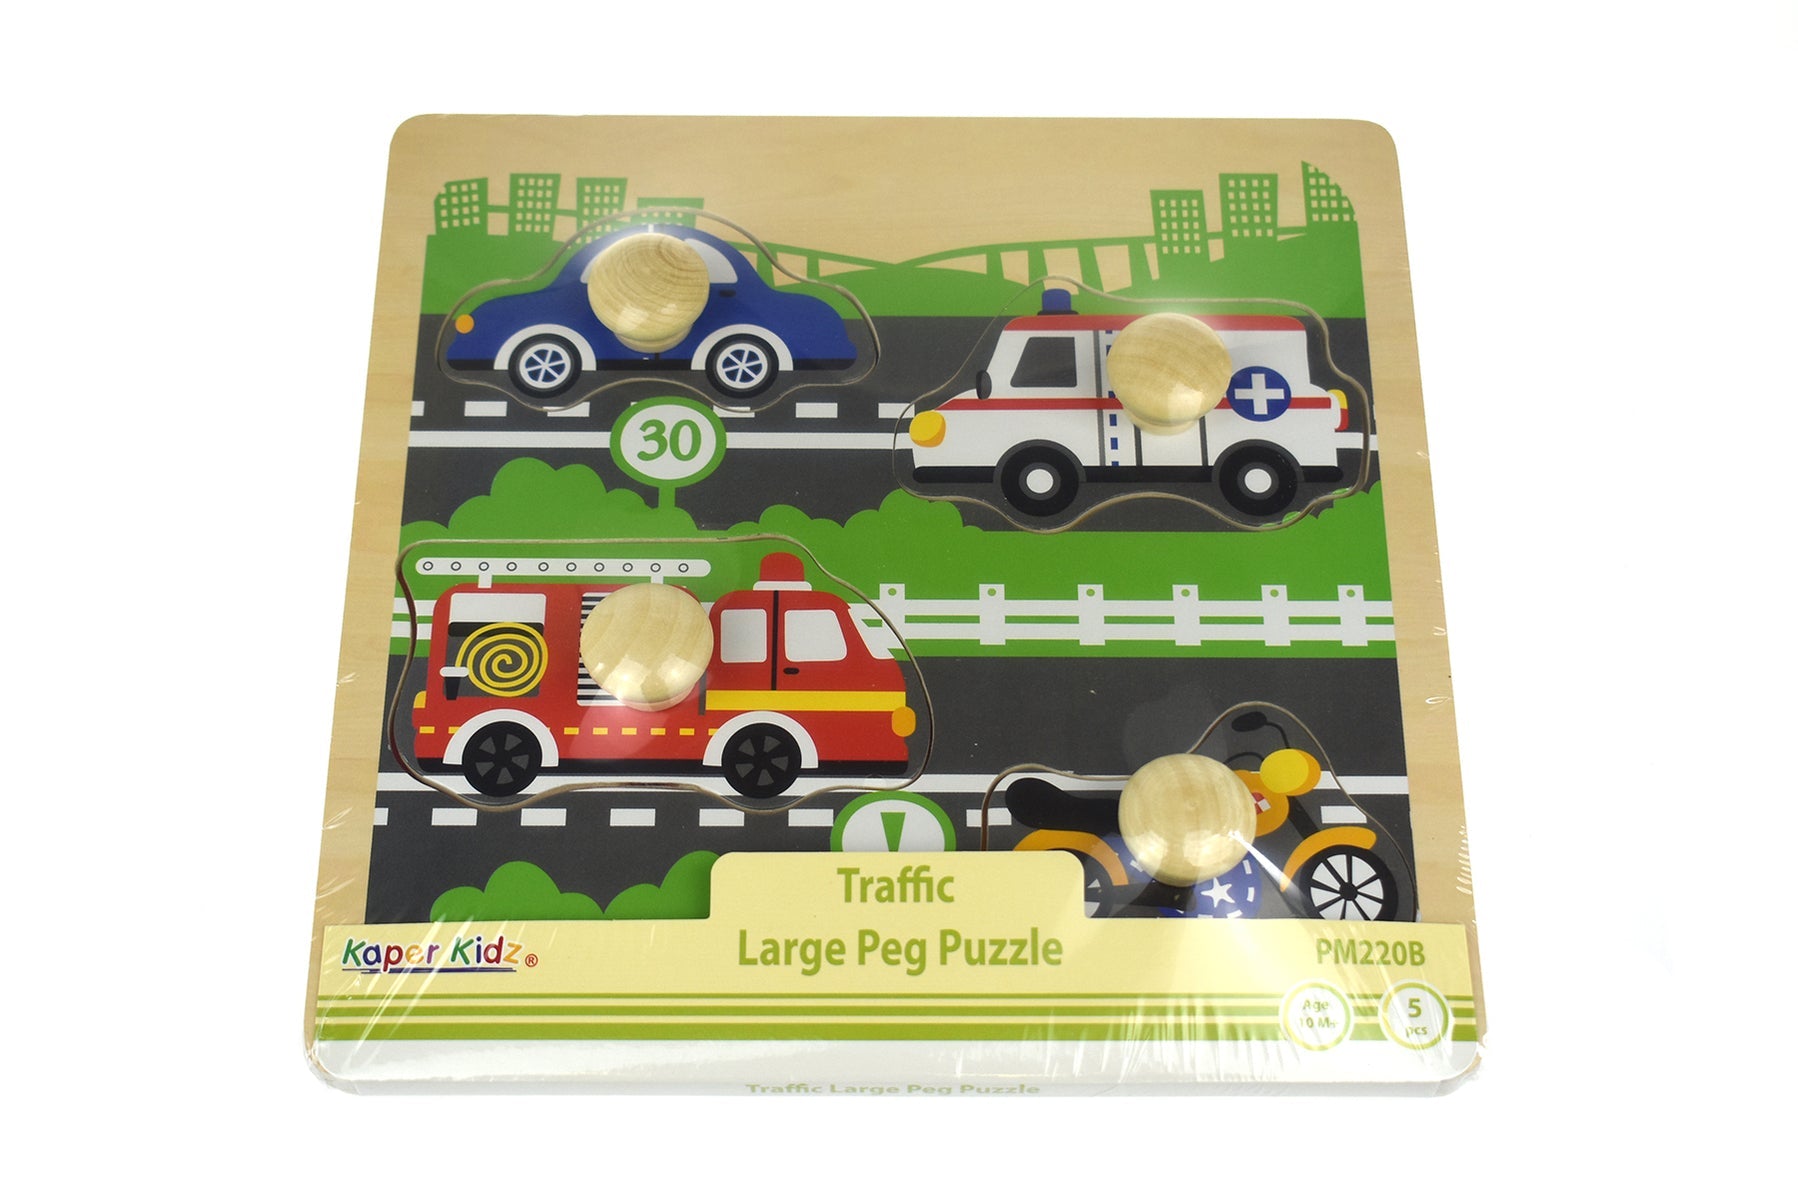 Experience the Thrill of Solving a Traffic Large Peg Puzzle